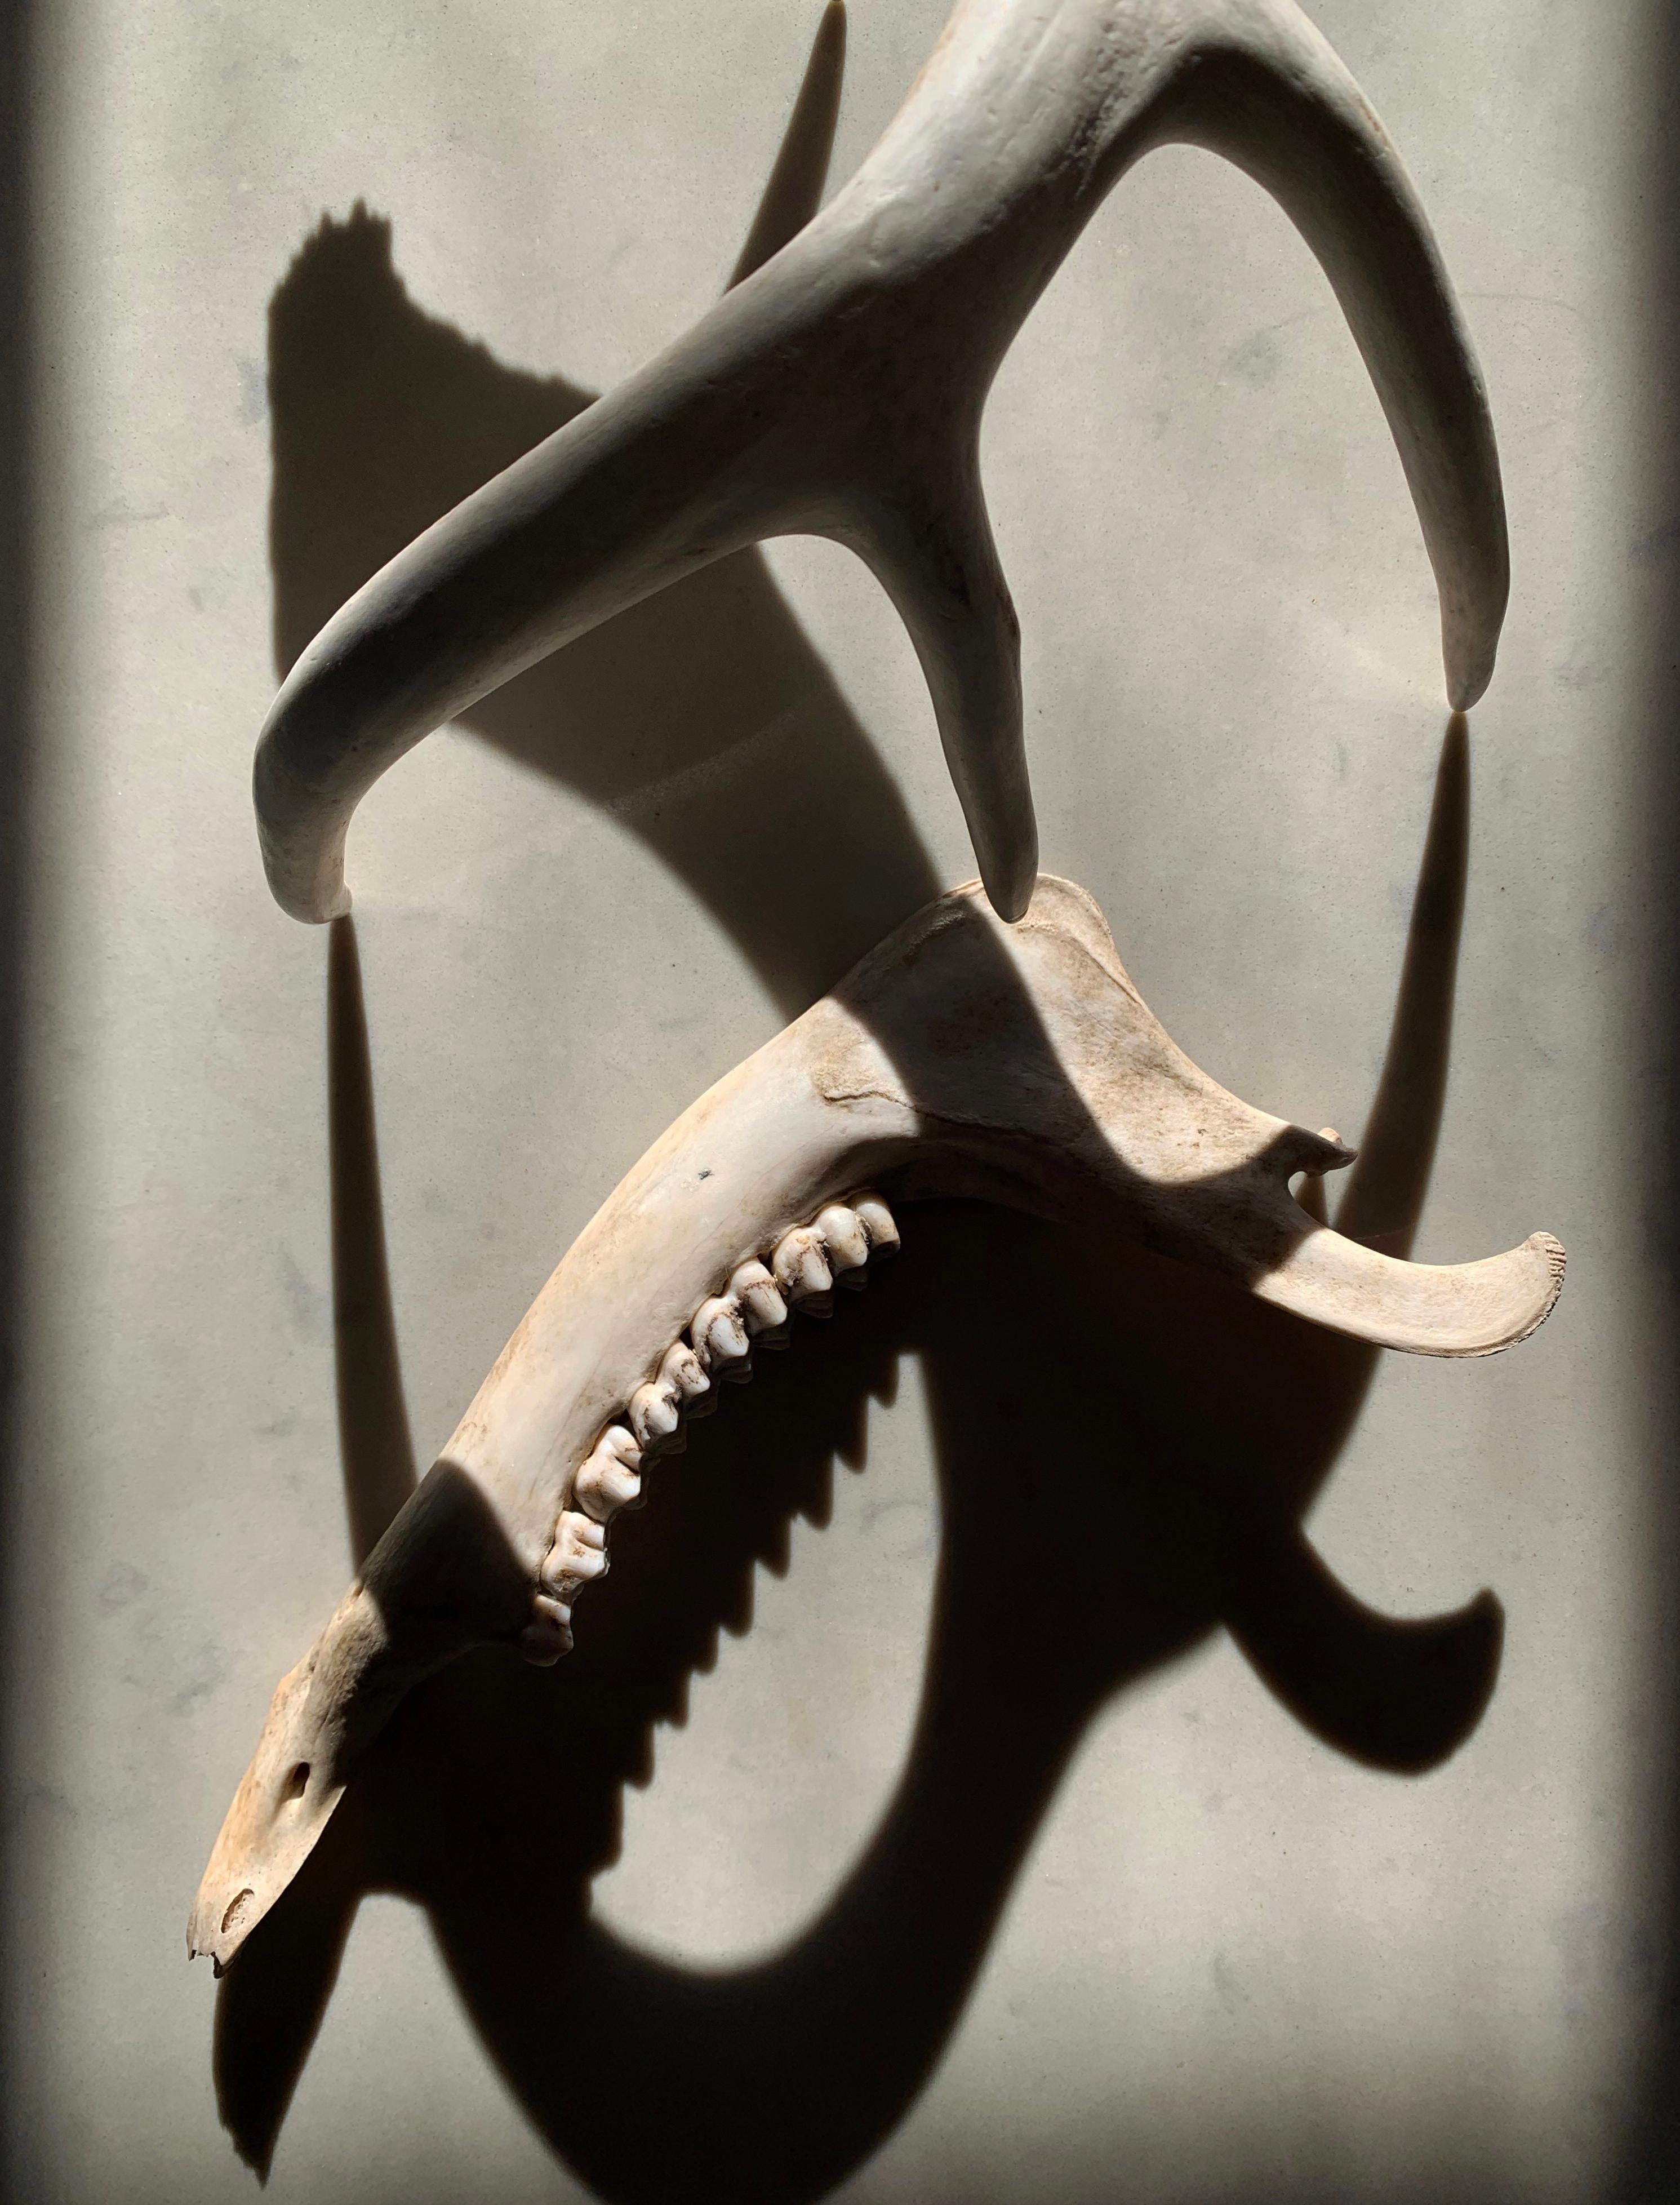 Untitled (2155): still life photograph w/ antler, bone & abstract shadows, large